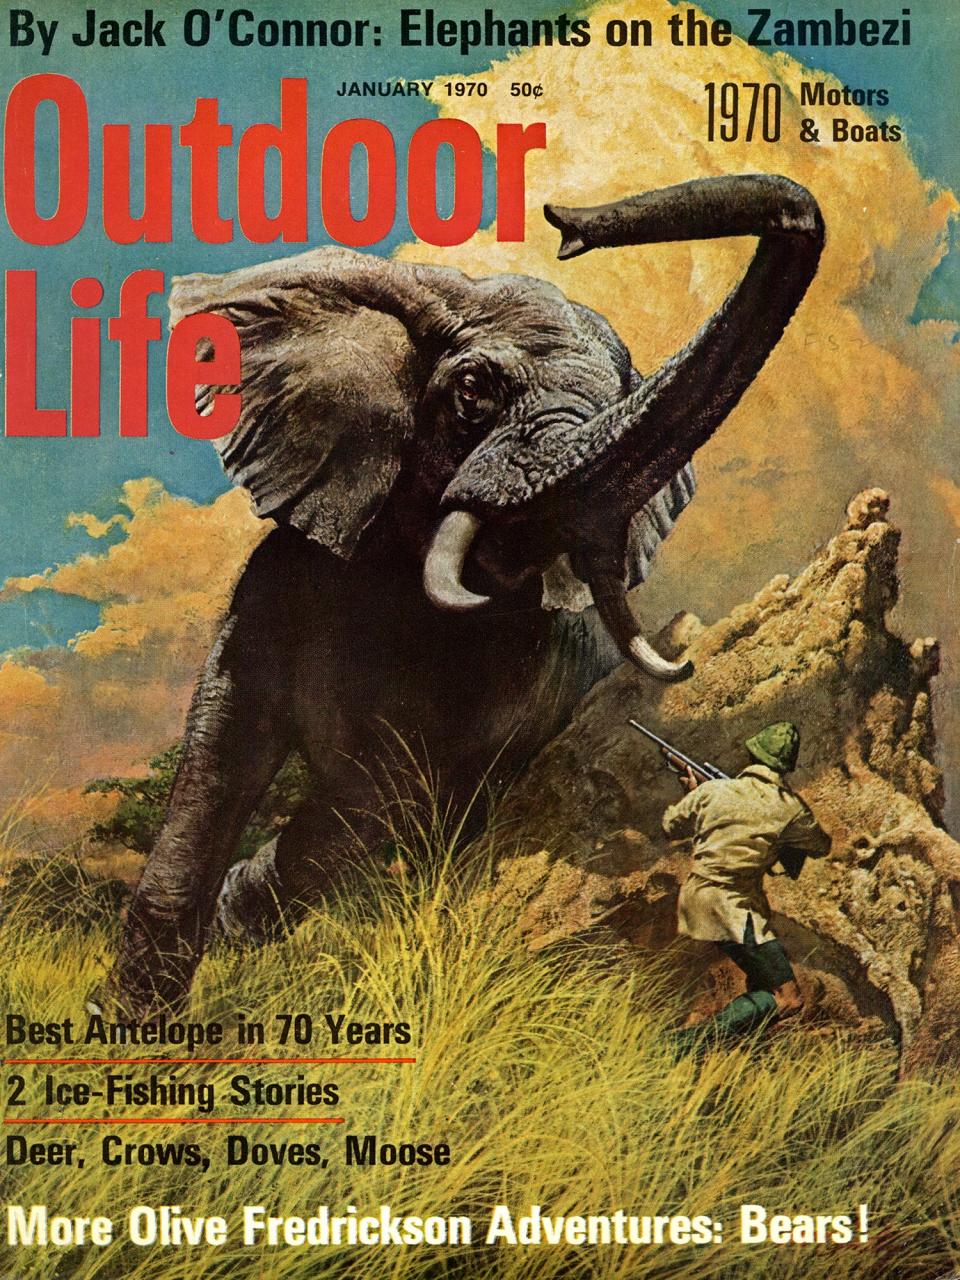 January 1970: Many of Jack O’Connor’s stories were illustrated for the covers.